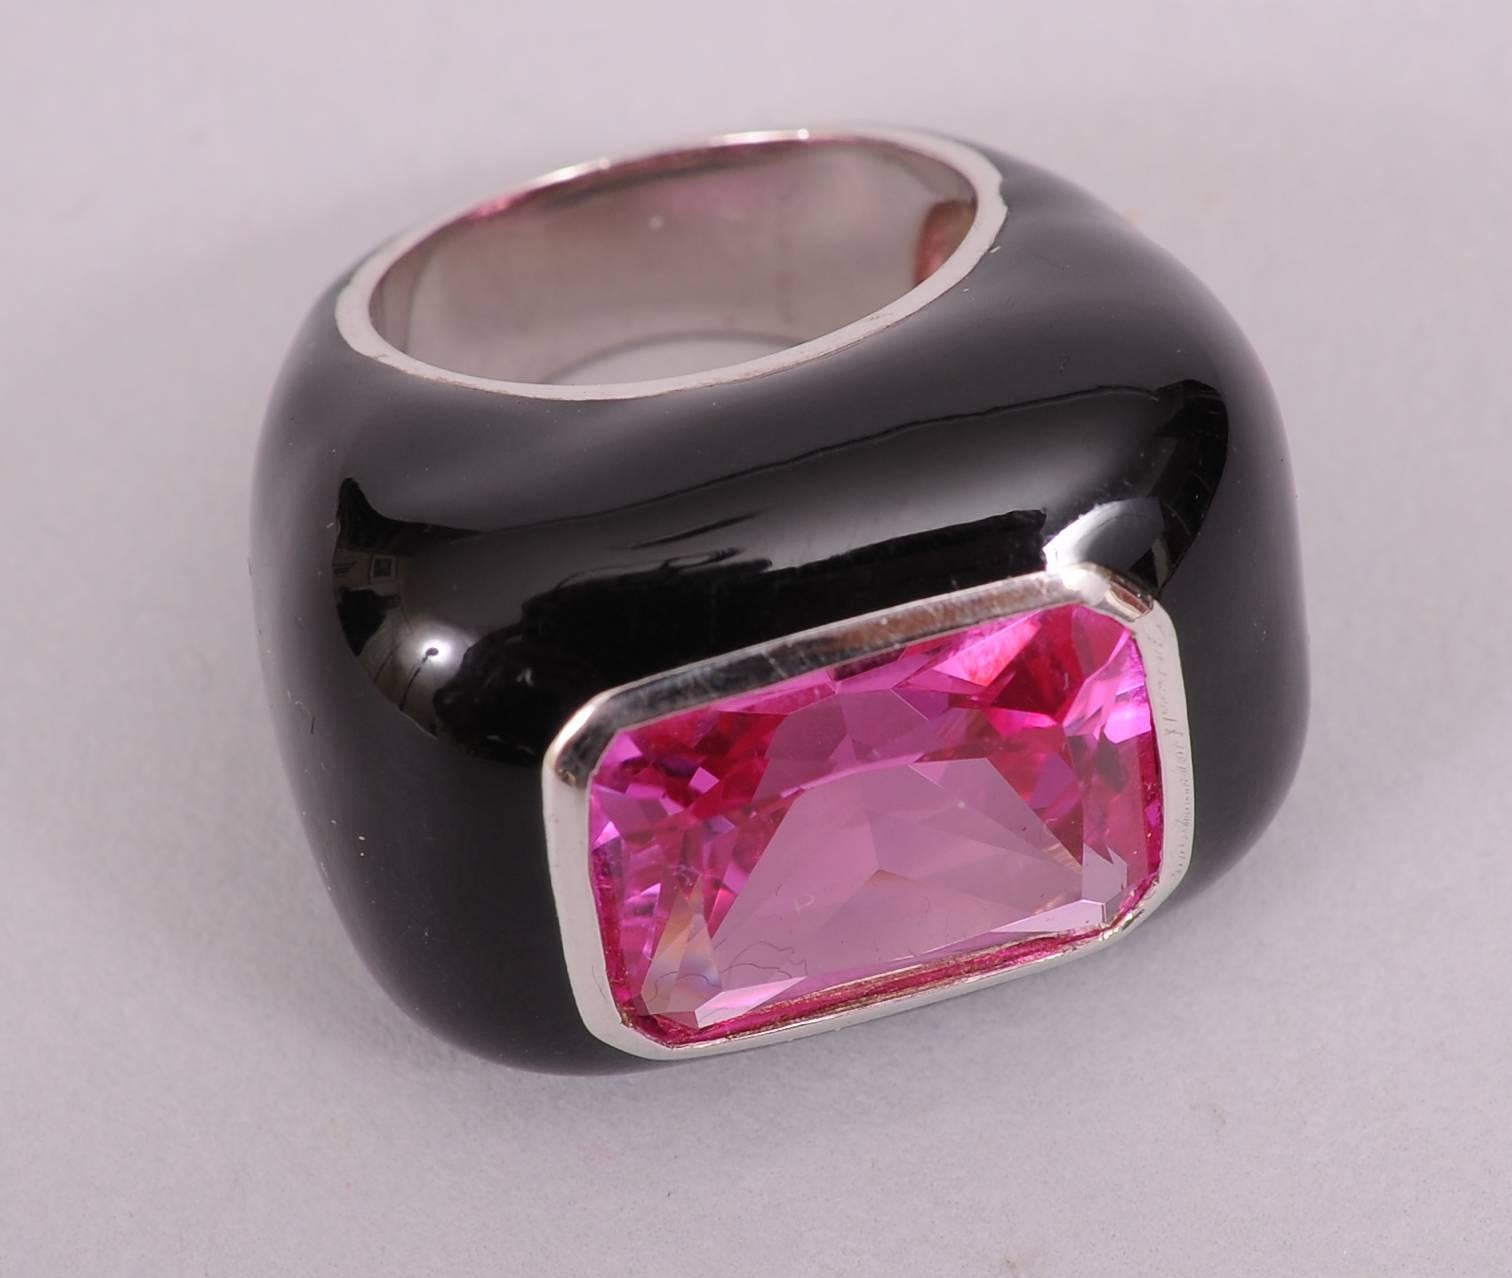 The striking combination of bright pink  and the glistening black enamel set off by sterling silver bands creates a very dramatic ring. This piece is large and impressive, the stone is approximately 12 carats. The ring is signed by the well regarded